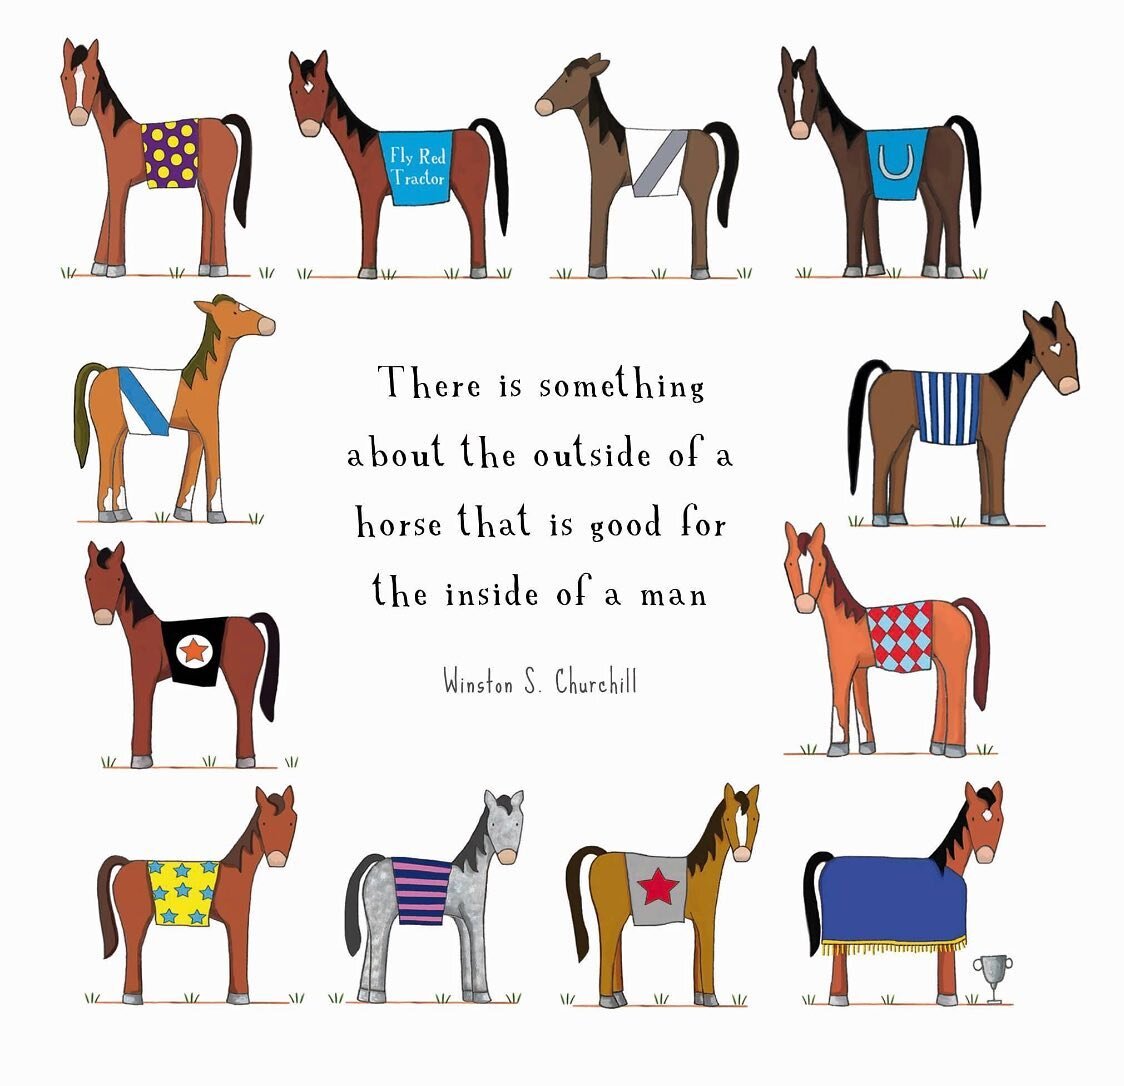 &ldquo;There&rsquo;s something about the outside of a horse that is good for the inside of a man.&rdquo;

#happybirthday #horses #welovehorses